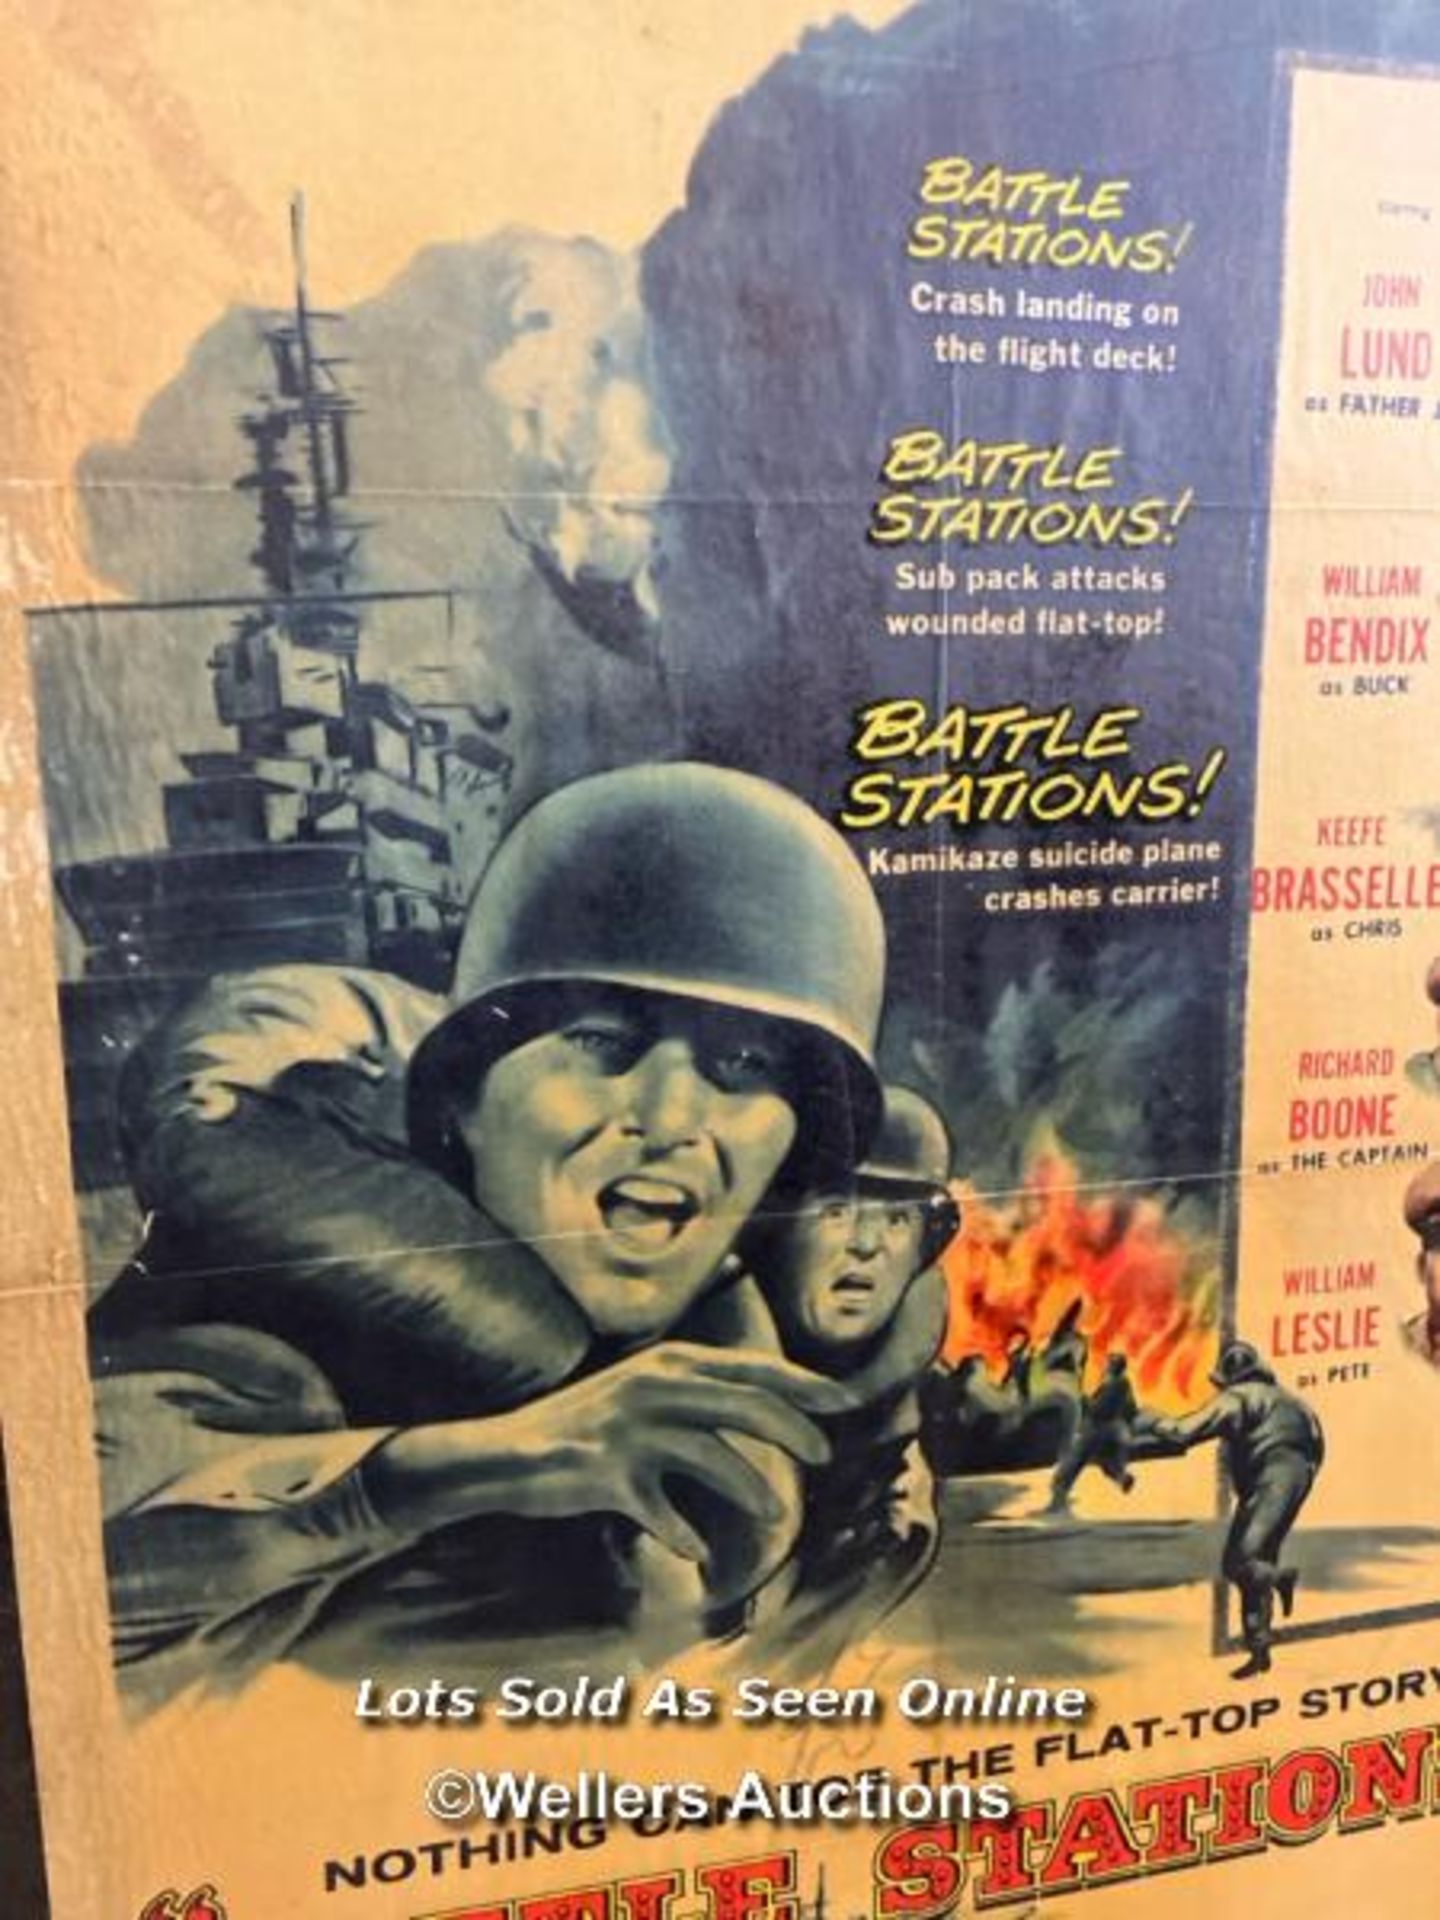 'BATTLE STATIONS' FILM POSTER, 56/26, PASTED ONTO BOARD FOR THEATRICAL USE, POSTER SIZE 69 X 104CM - Image 3 of 5